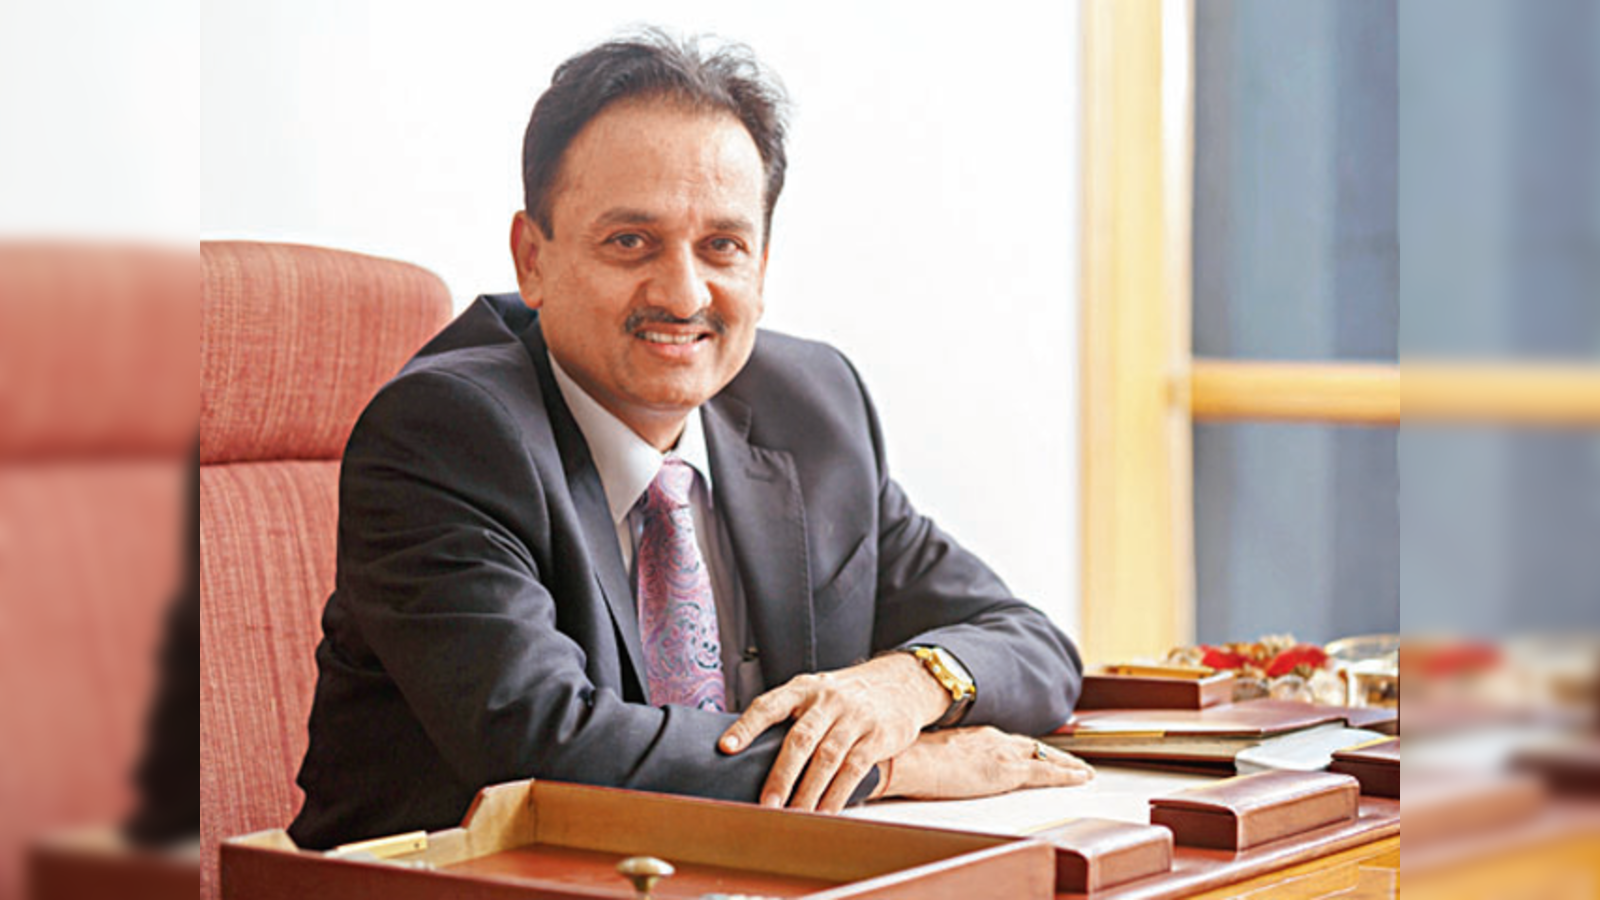 Chudgars of Intas: A family that dreams big together - The Economic Times